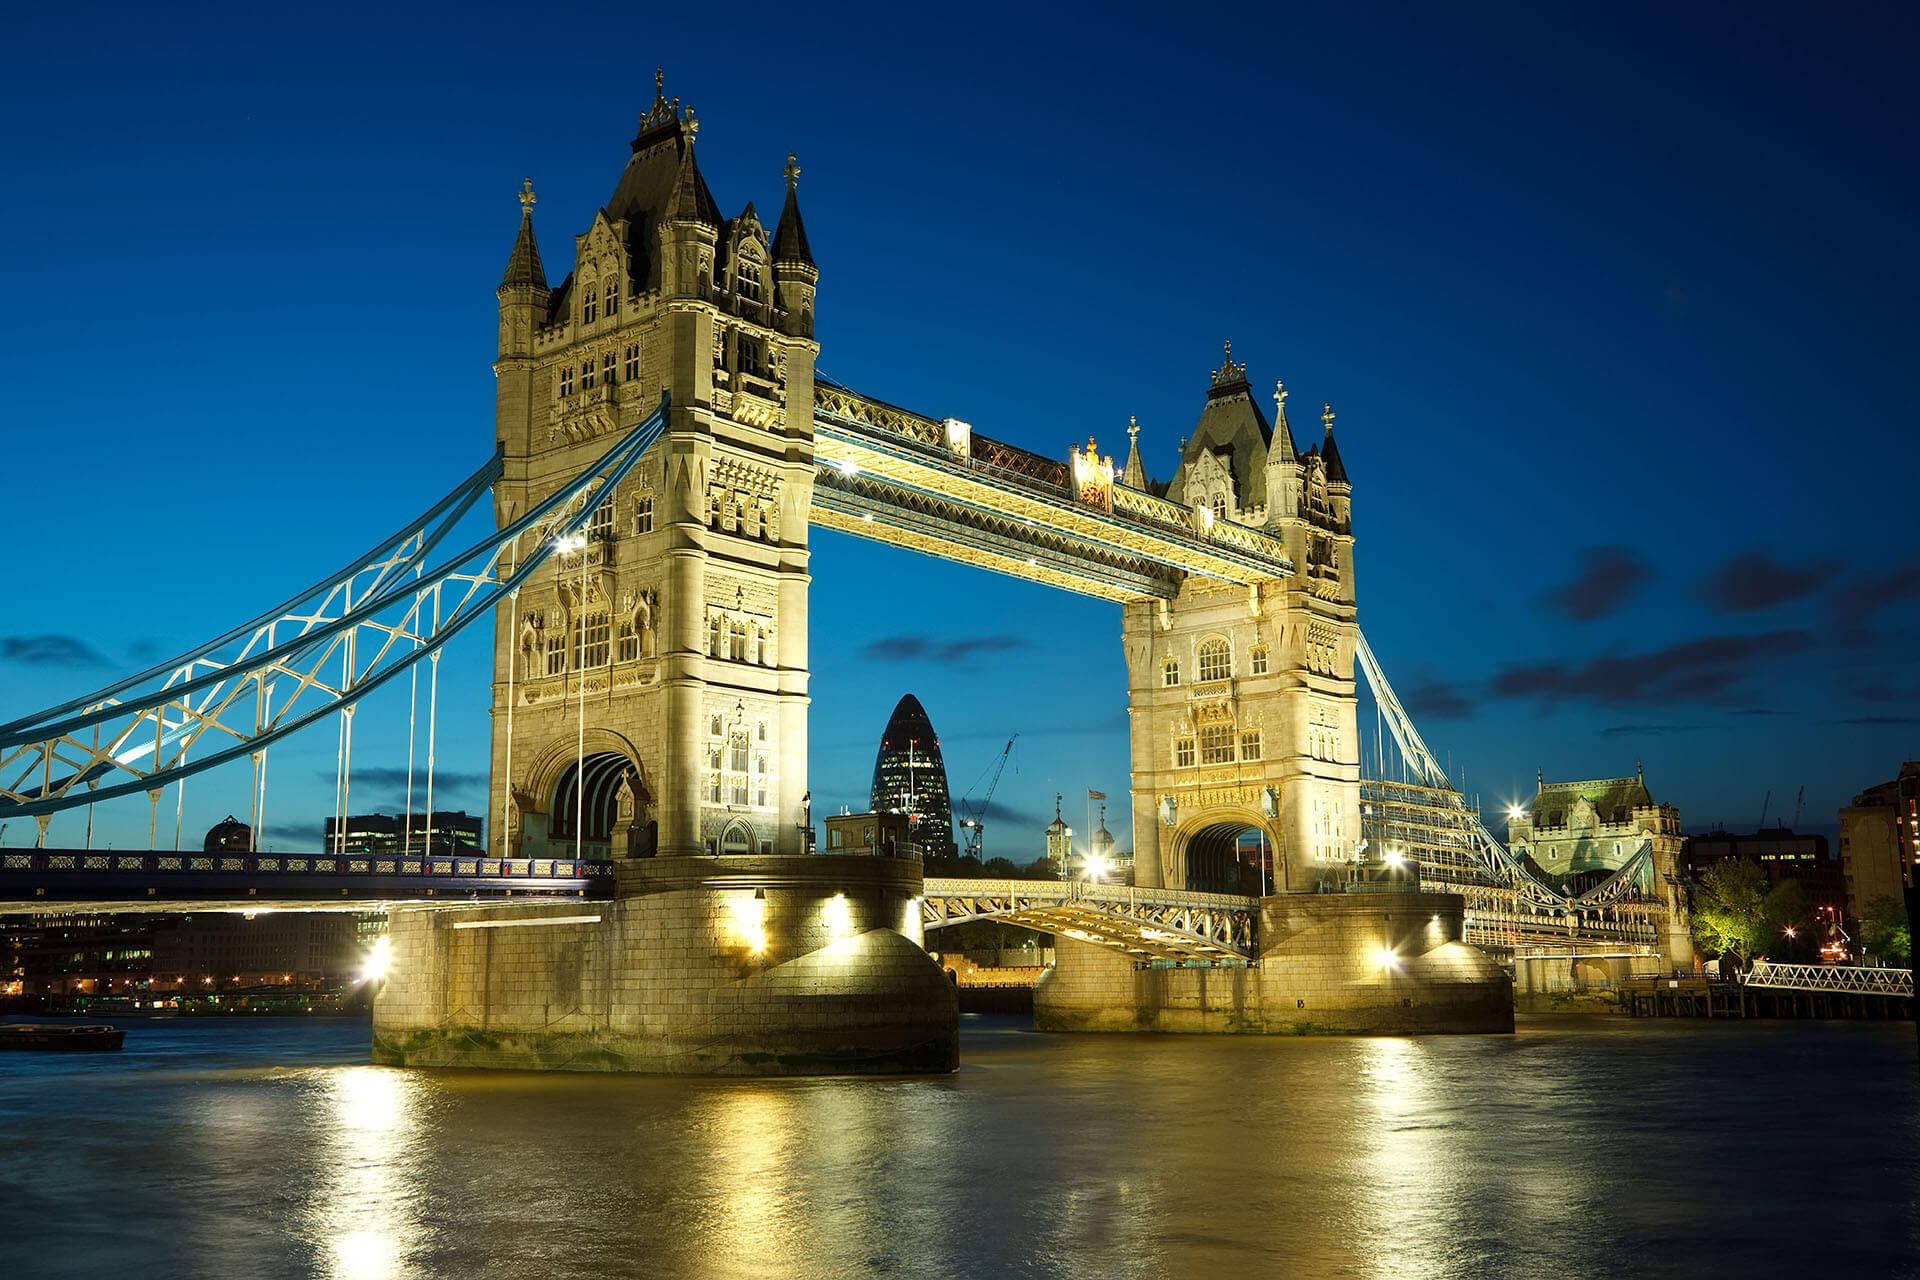 UK: Closing of Government’s Tier 1 Investor Visa Route